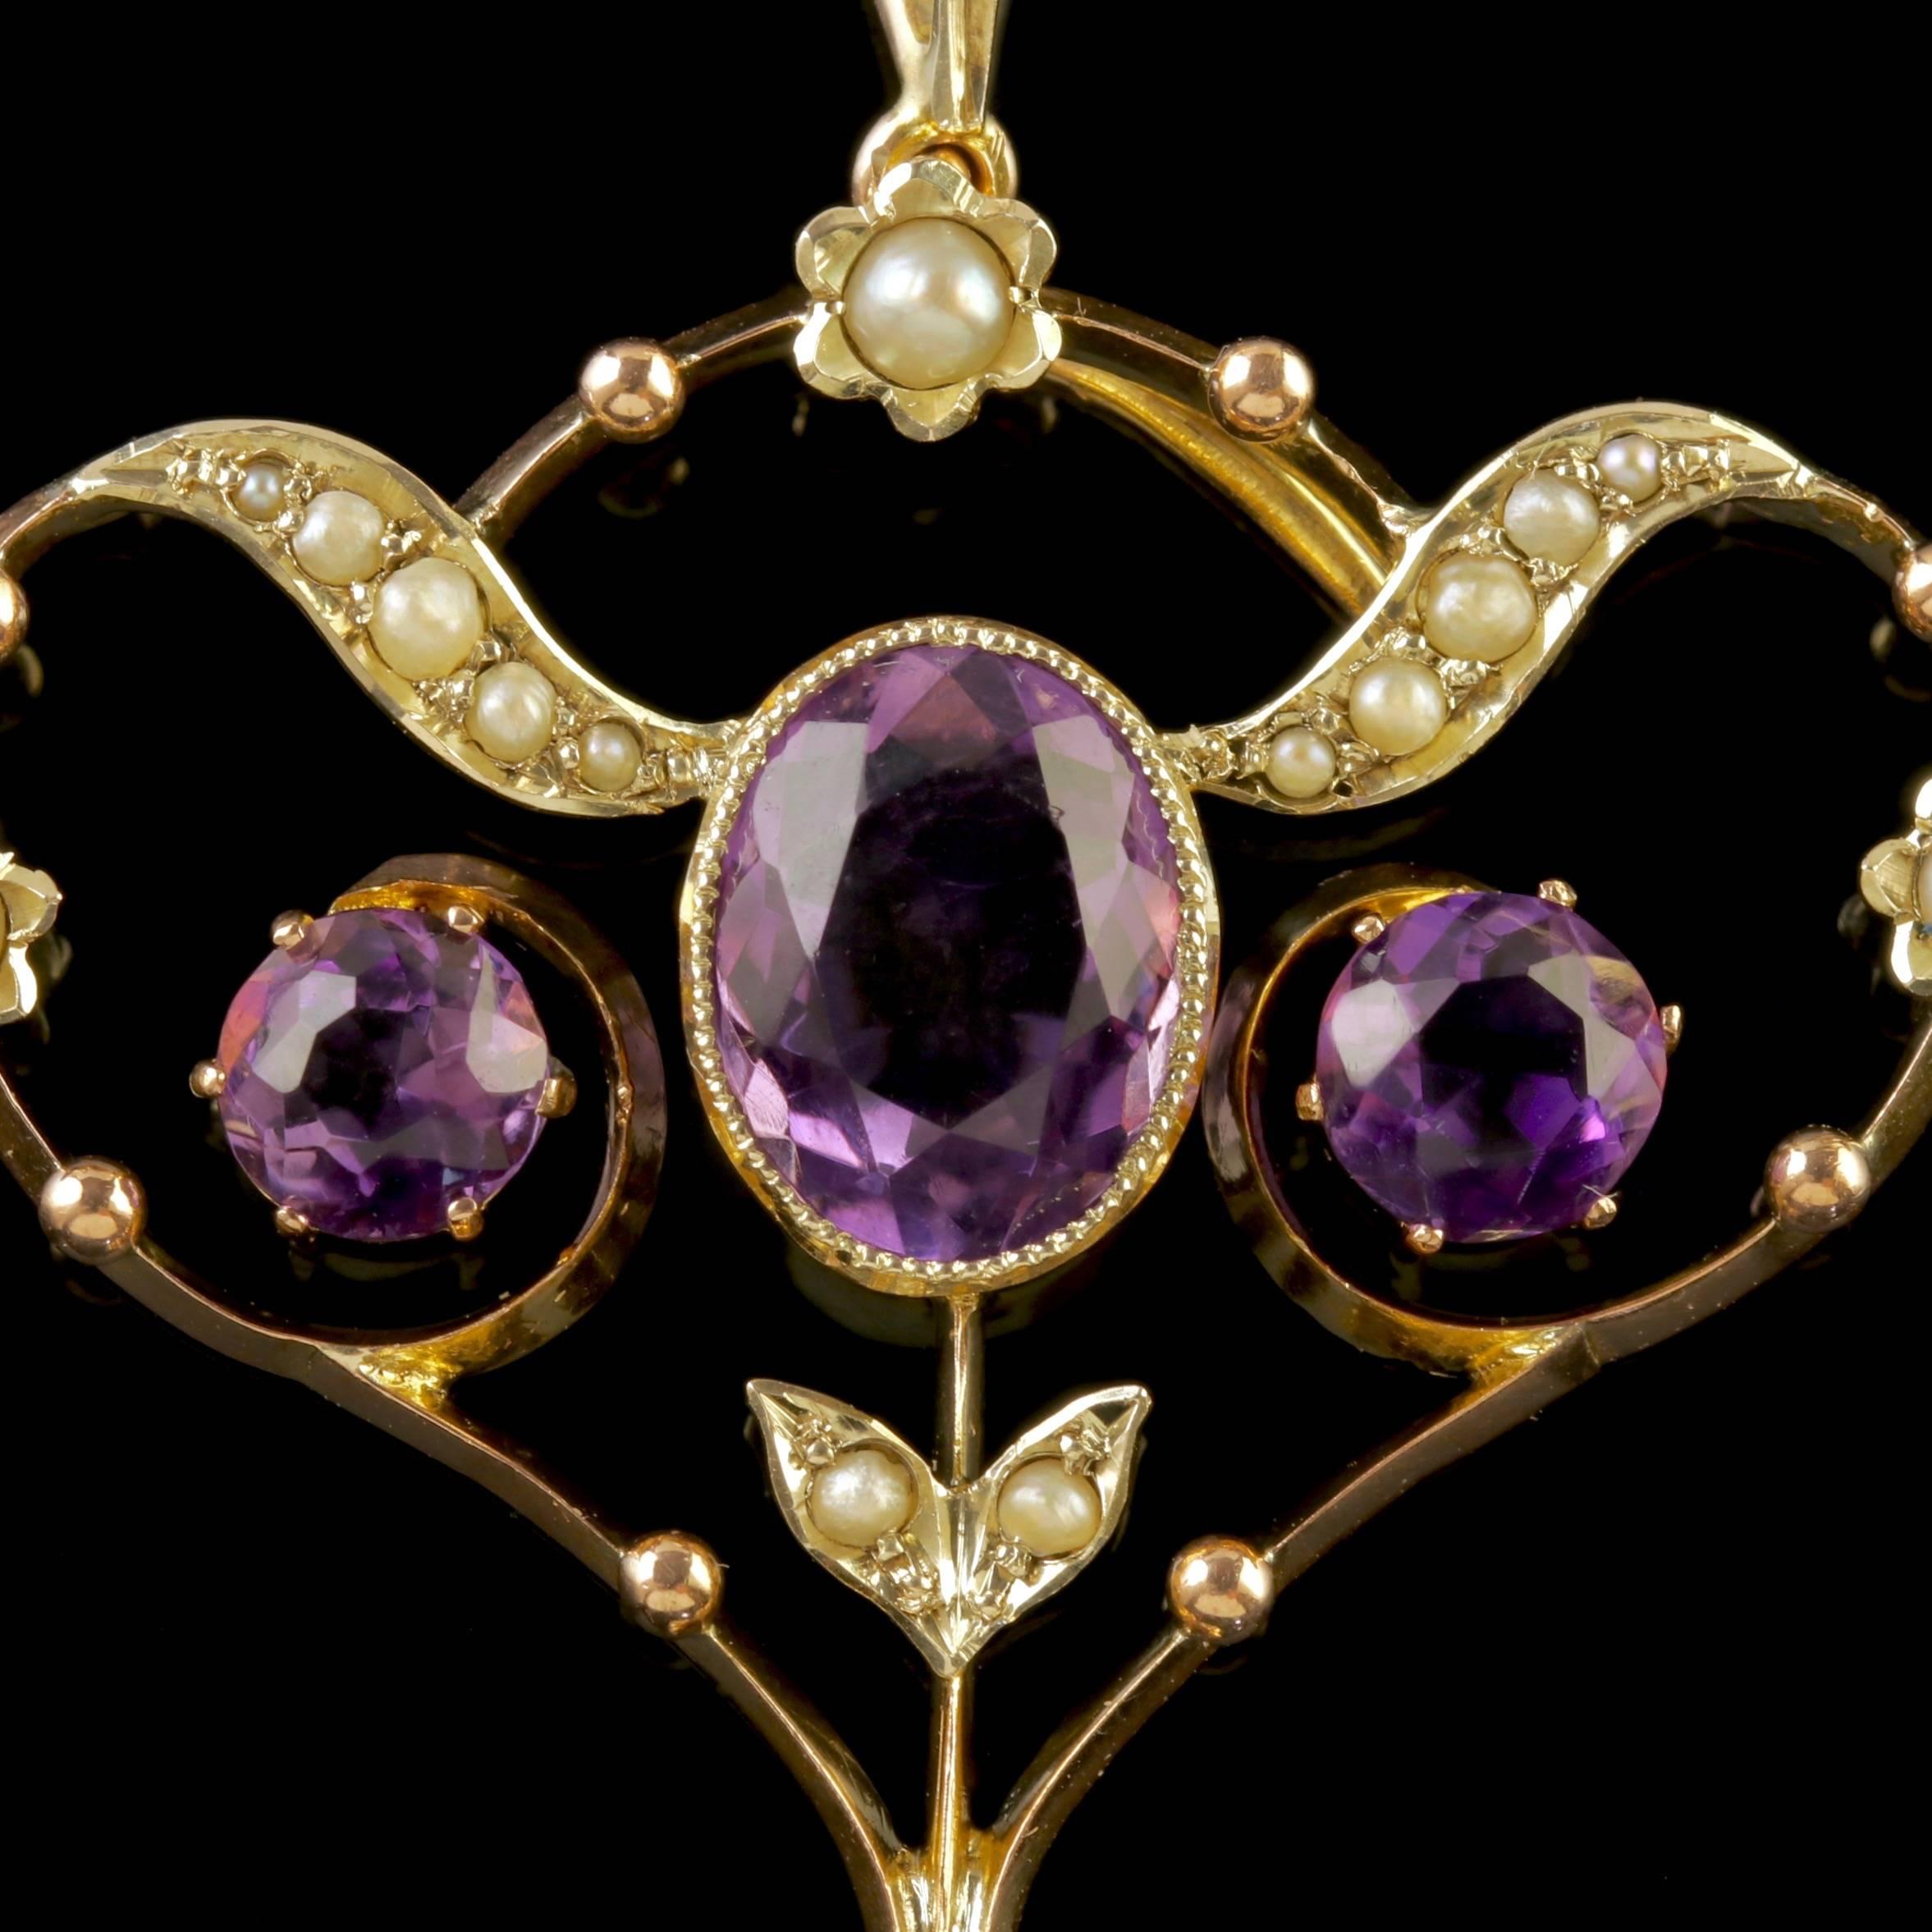 To read more please click continue reading below-

This fabulous antique 15ct Yellow Gold floral Suffragette Pendant is genuine Victorian, Circa 1900. 

Emmeline Pankhurst was the leader of the British Suffragette movement in the 19th century and